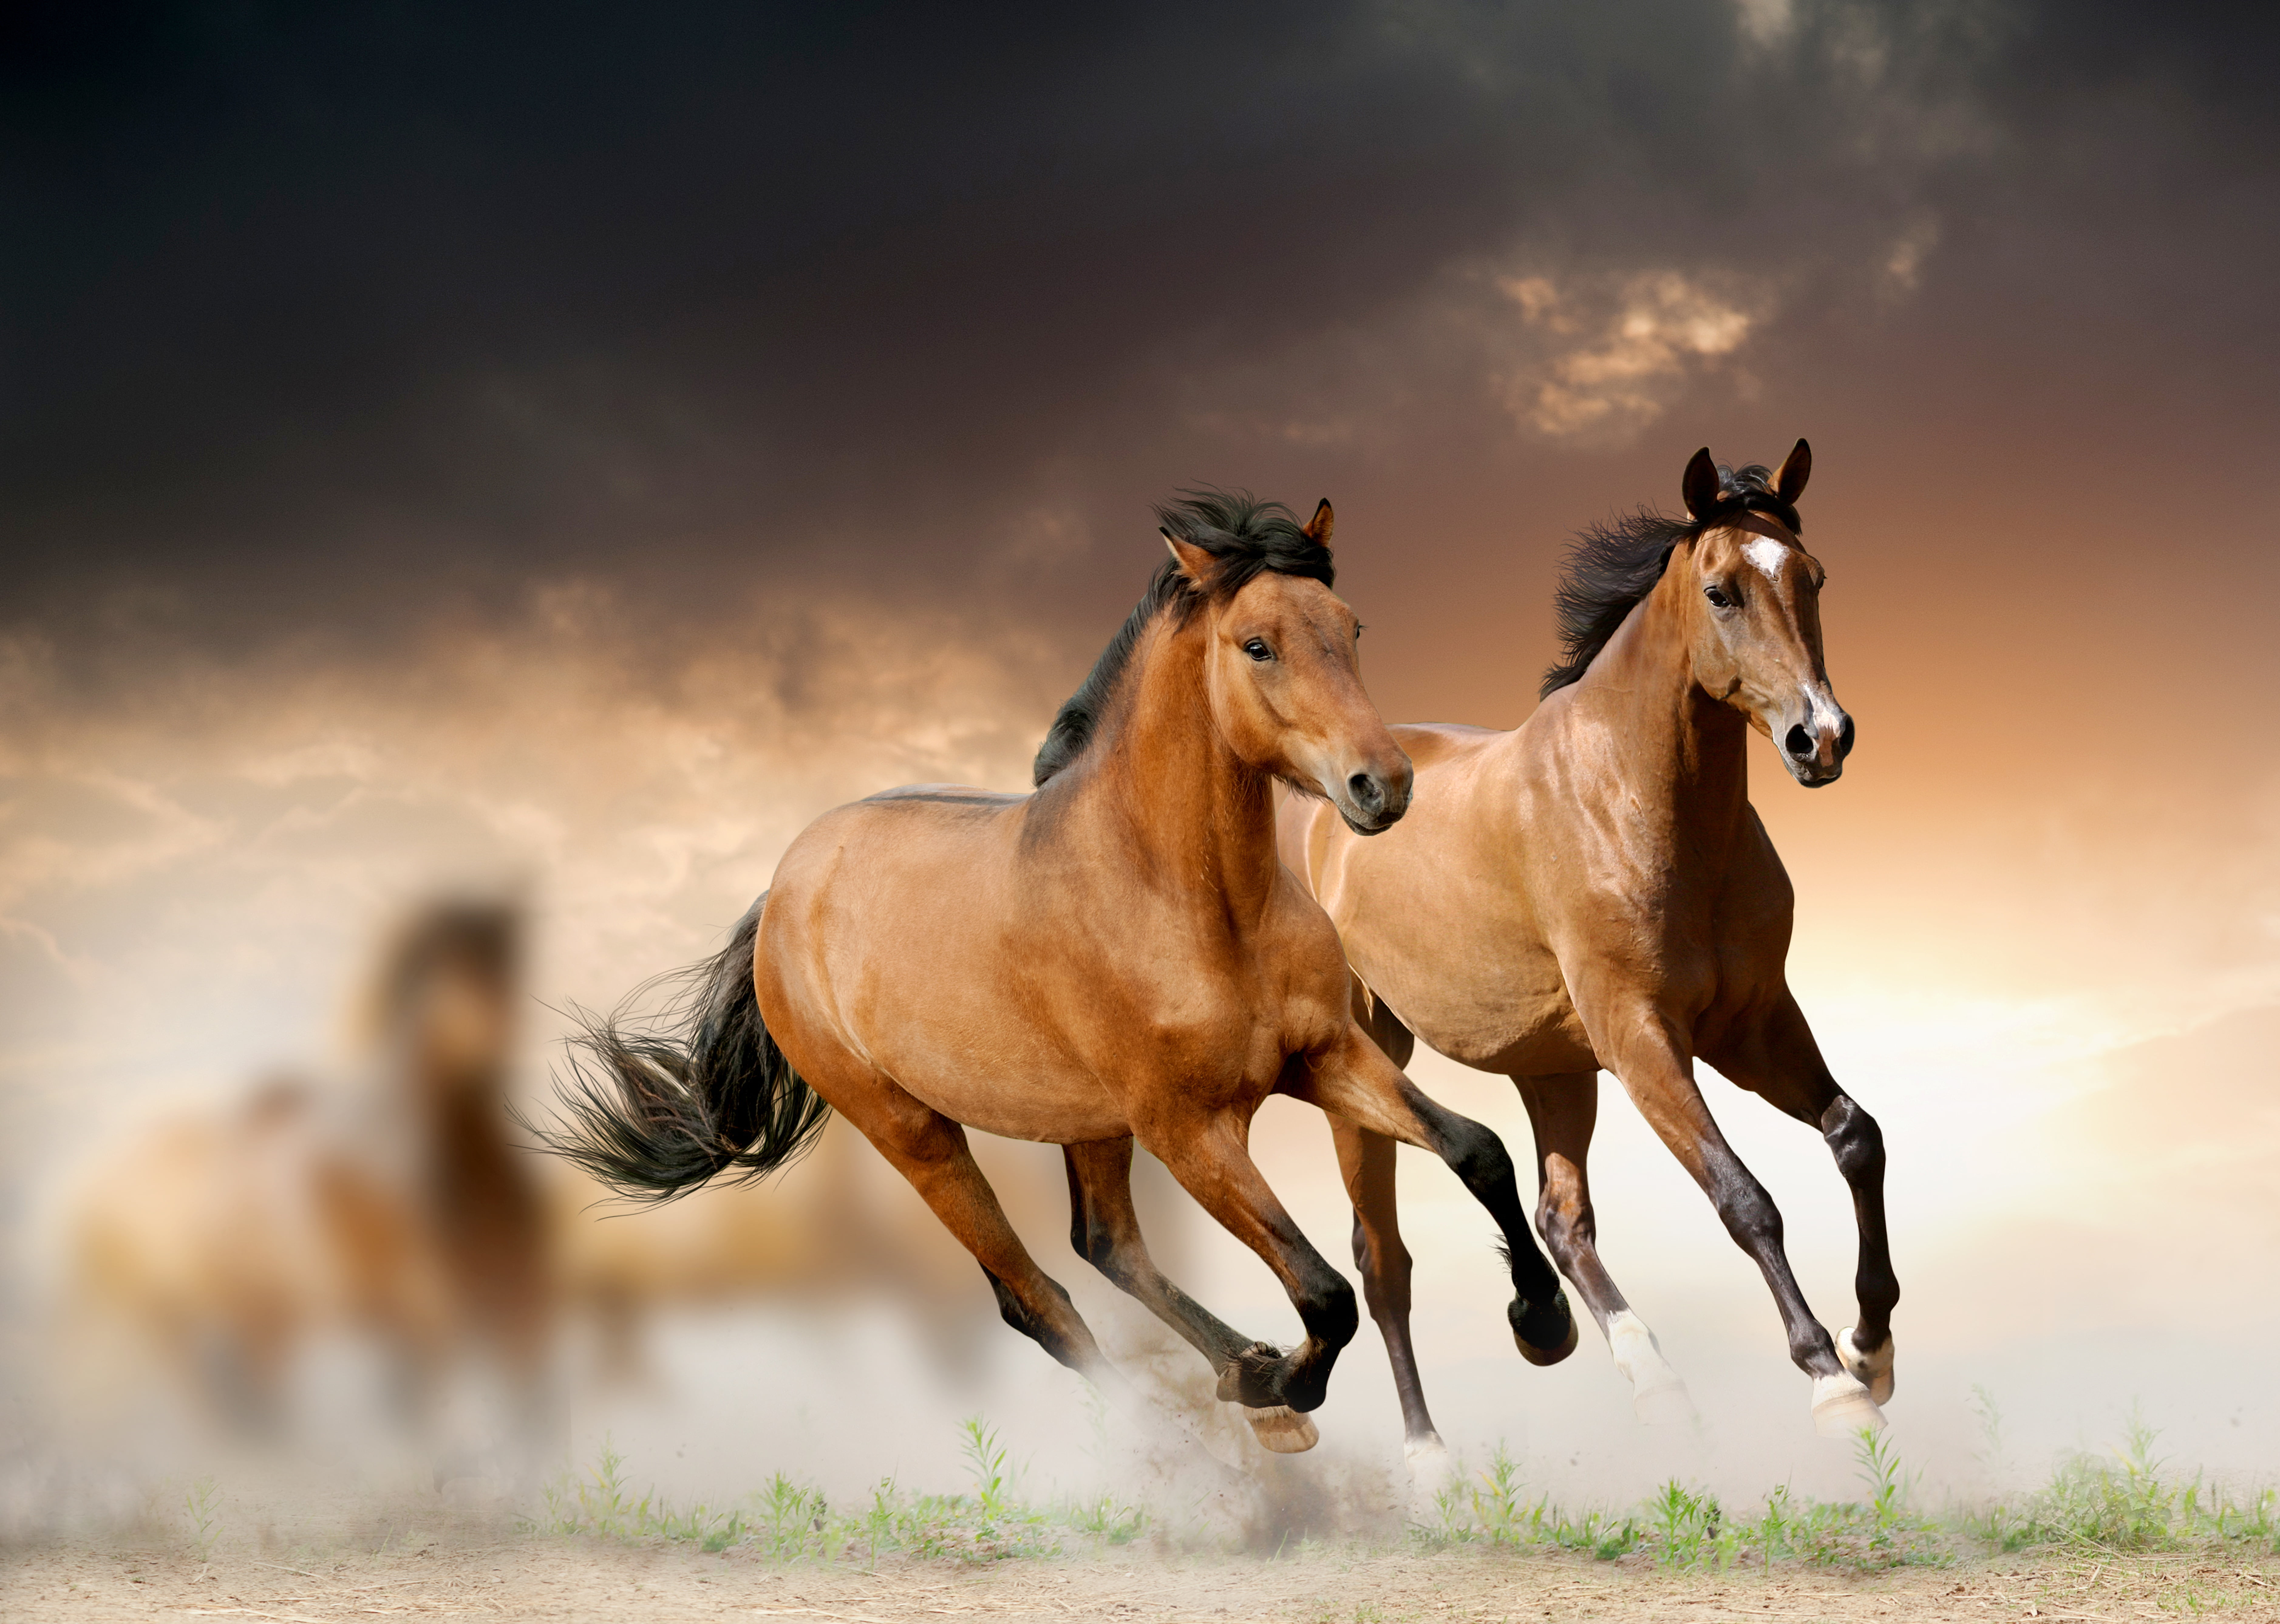 two brown horses, grass, clouds, running, animal, nature, outdoors